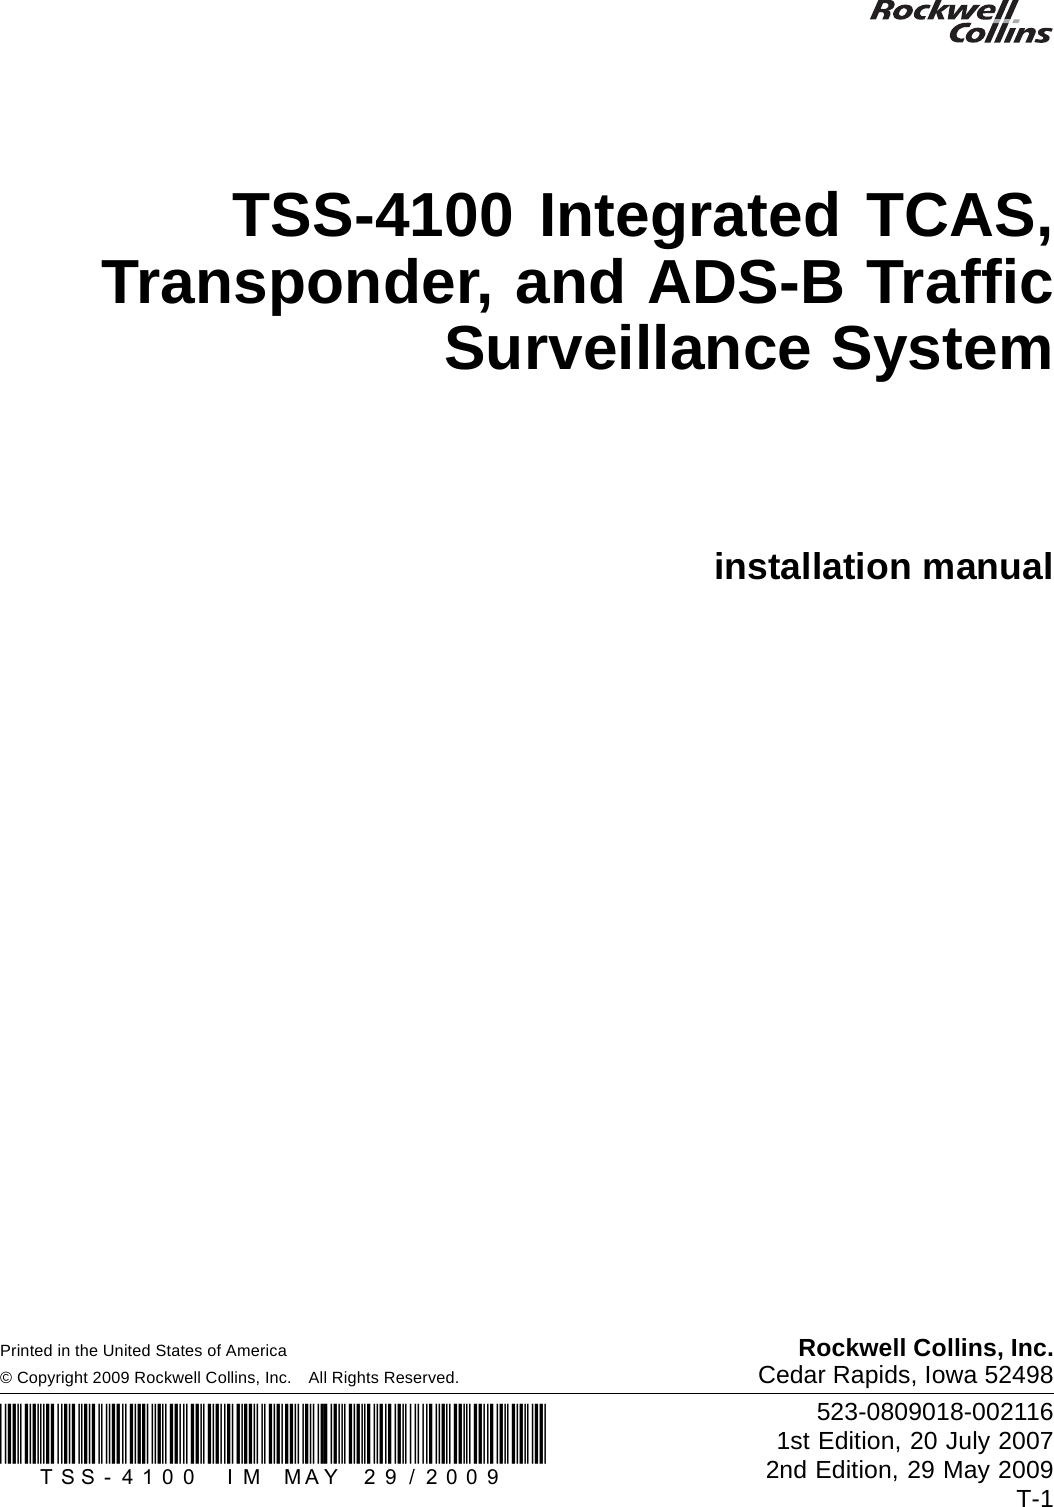 TSS-4100 Integrated TCAS,Transponder, and ADS-B TrafﬁcSurveillance Systeminstallation manualPrinted in the United States of America Rockwell Collins, Inc.© Copyright 2009 Rockwell Collins, Inc. All Rights Reserved. Cedar Rapids, Iowa 52498(_TSS-4100_IM_MAY_29/2009_) 523-0809018-0021161st Edition, 20 July 20072nd Edition, 29 May 2009T-1